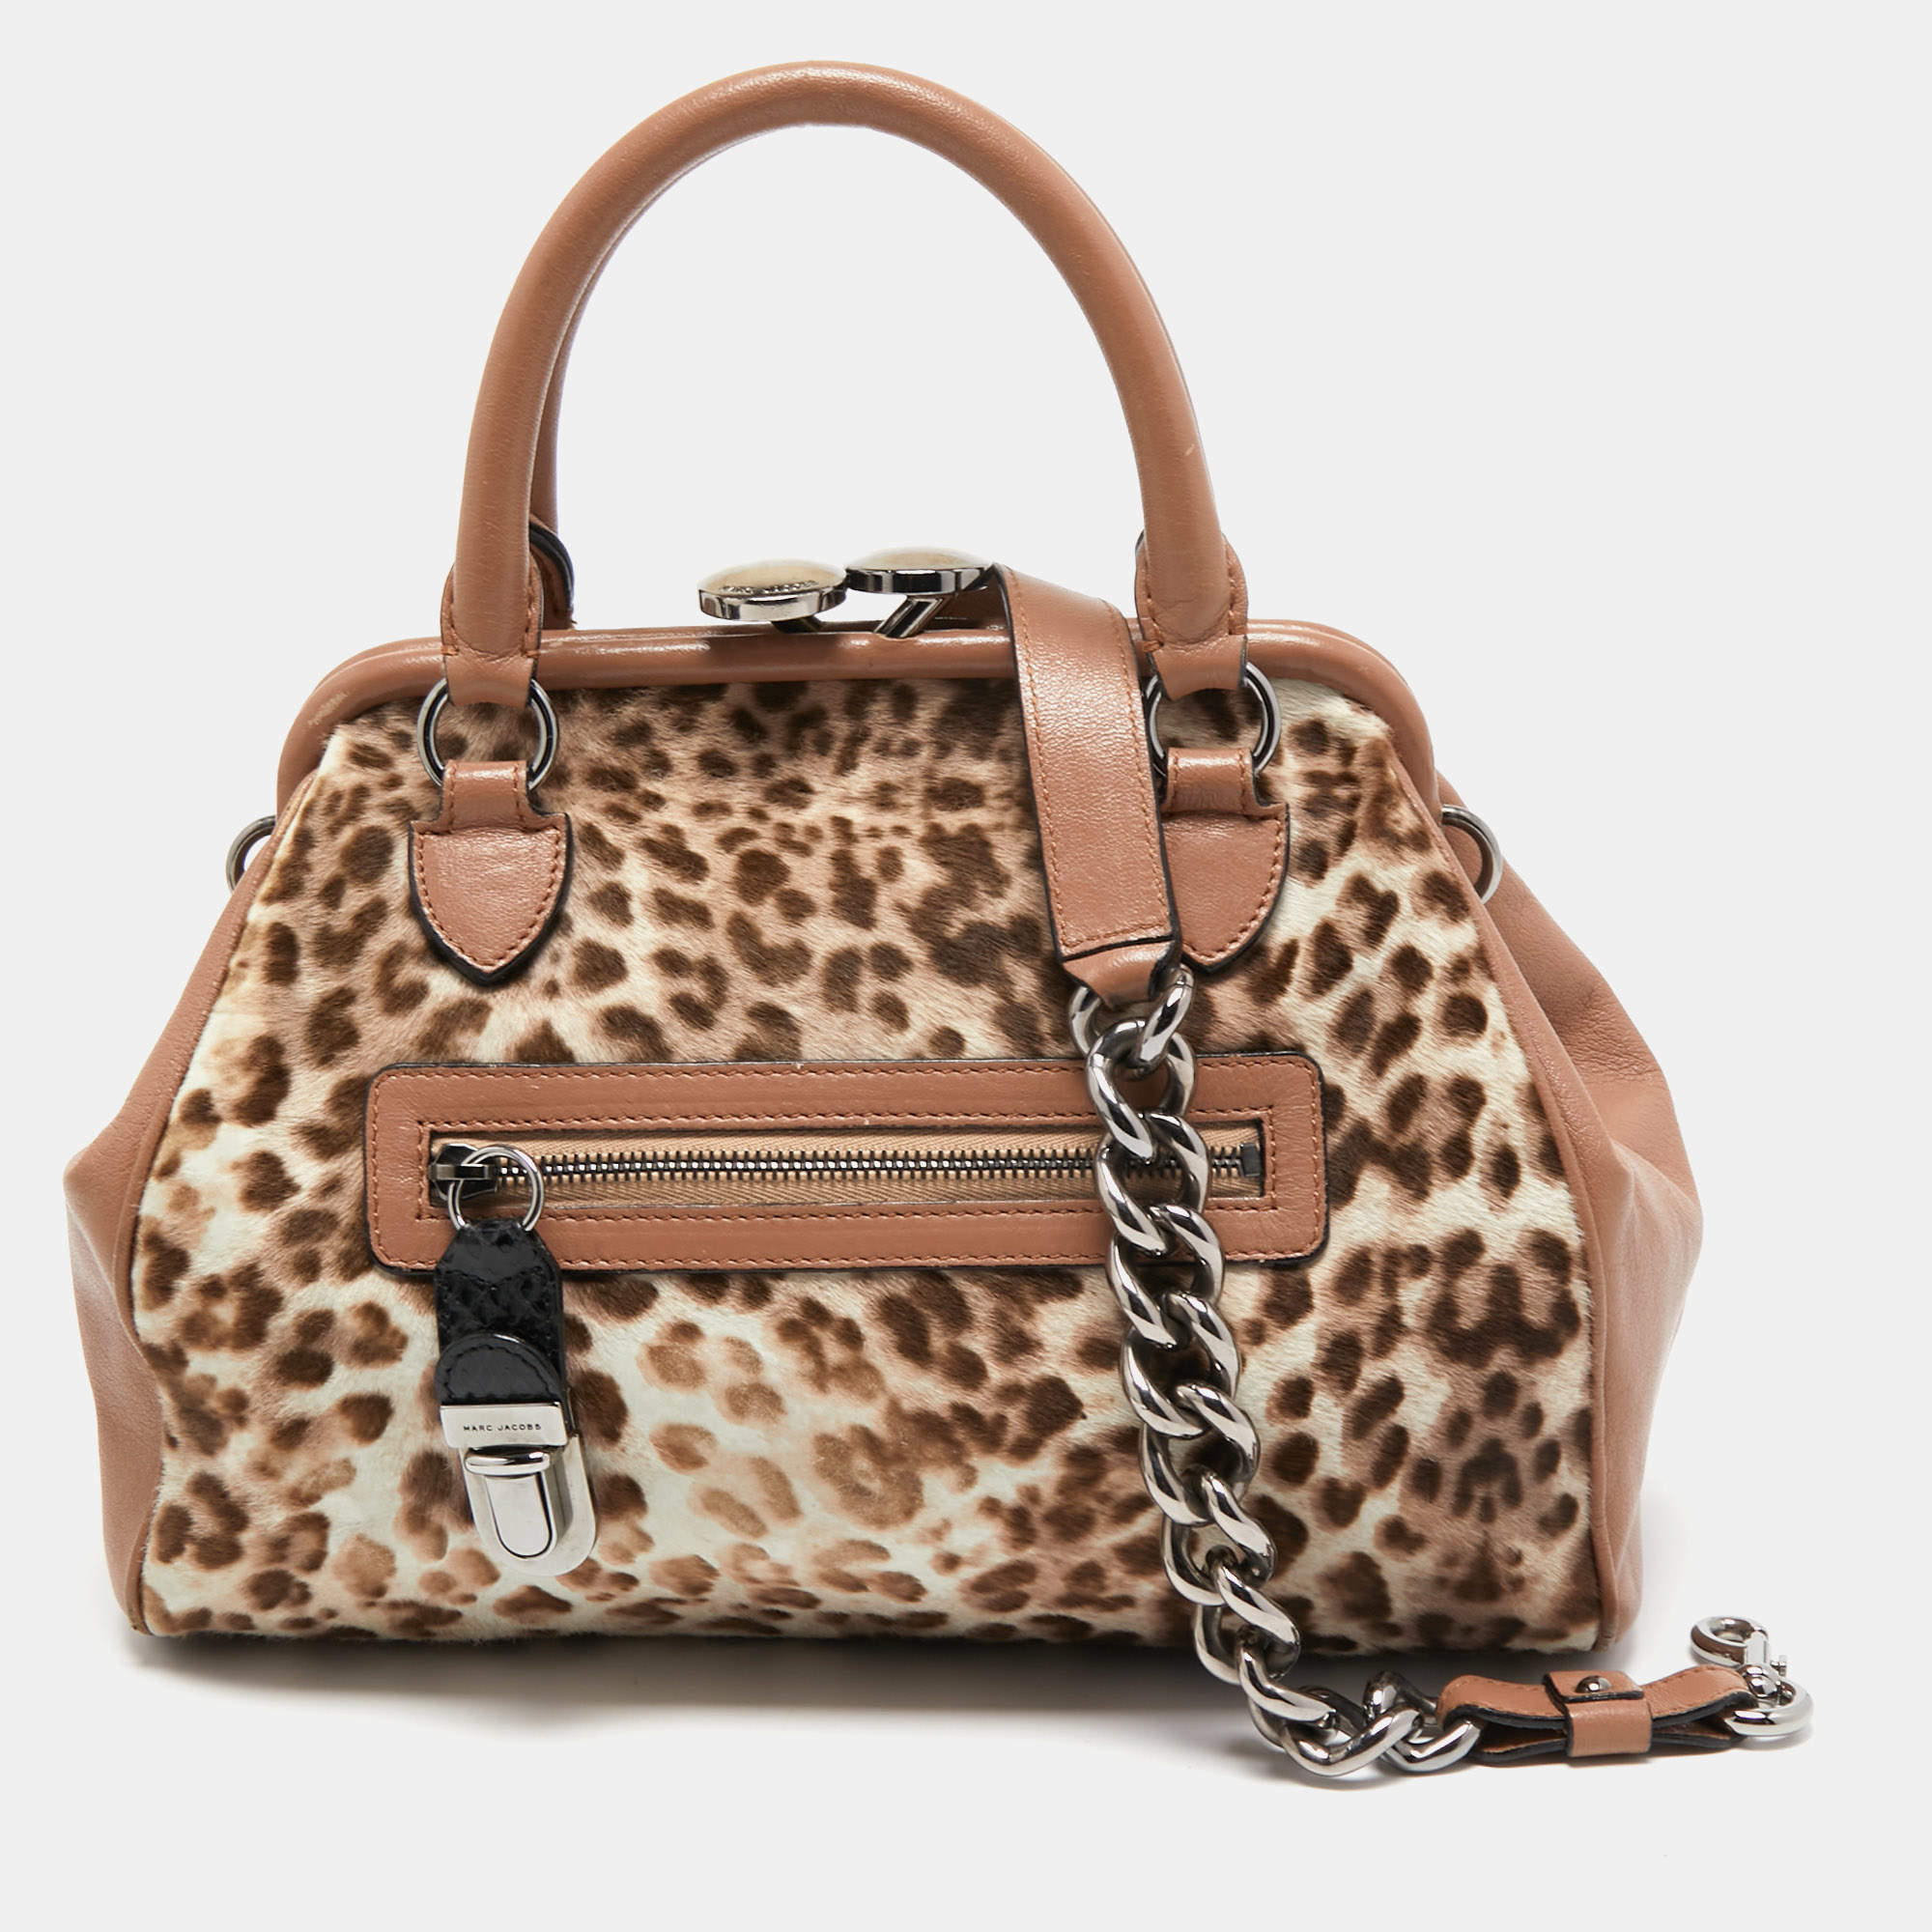 Marc Jacobs Dusty Pink Animal Printed Calf Hair and Leather Stam Satchel